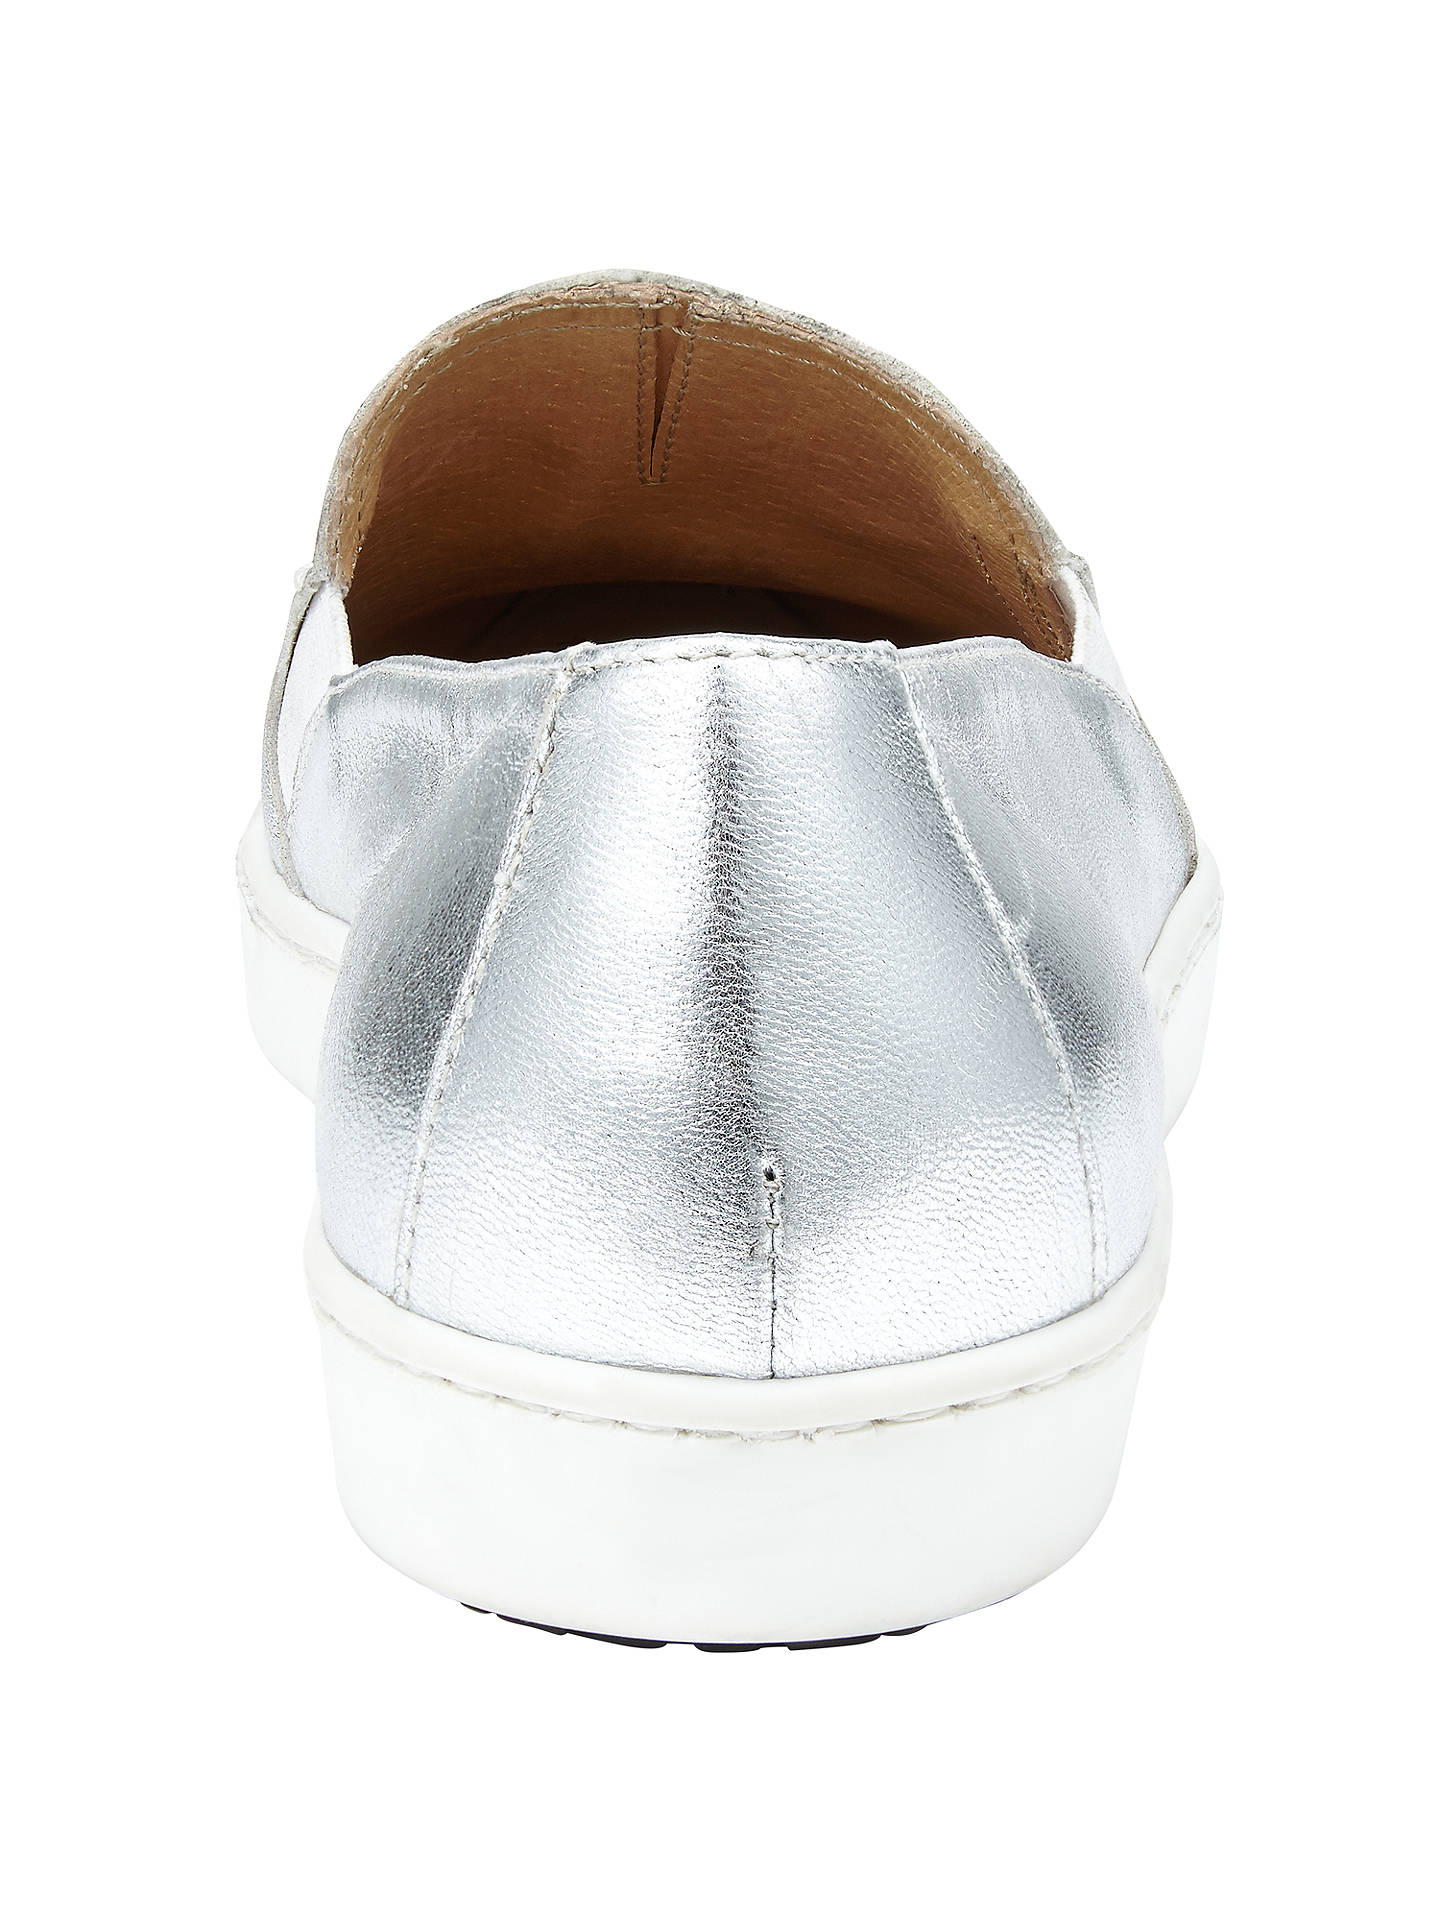 Kin Elise Pointed Toe Slip On Trainers, Silver at John Lewis & Partners